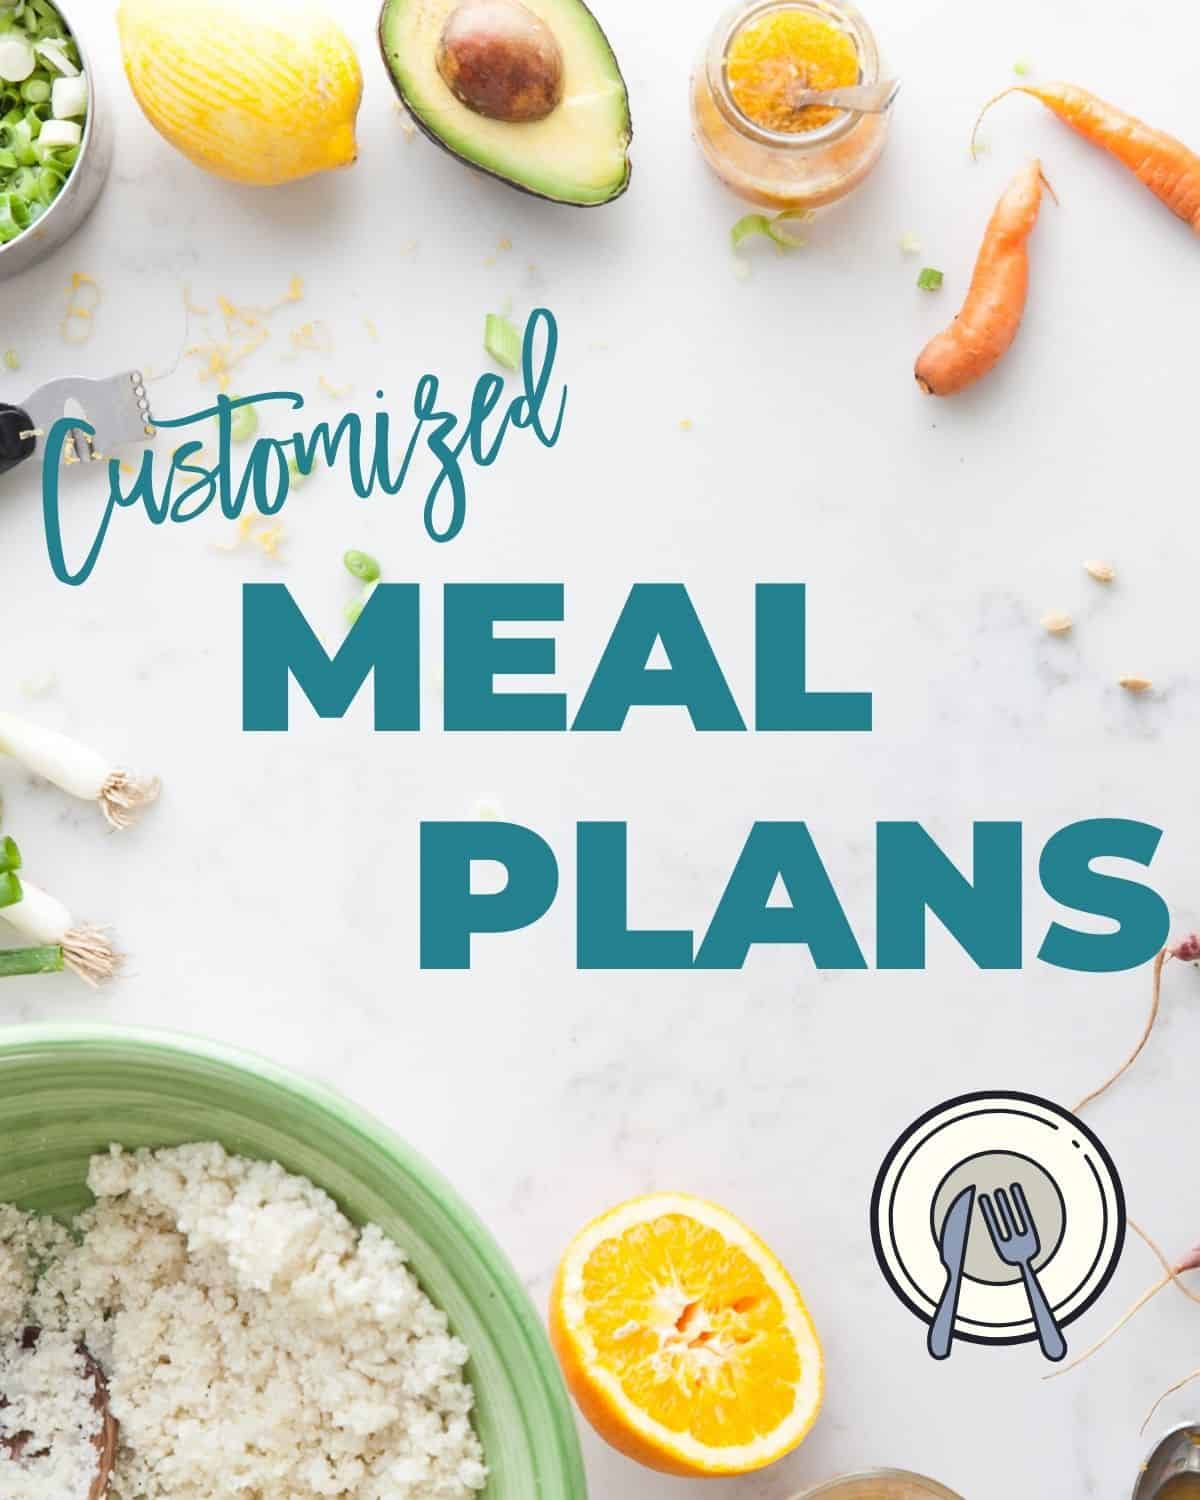 ingredients with the text "customized meal plans"